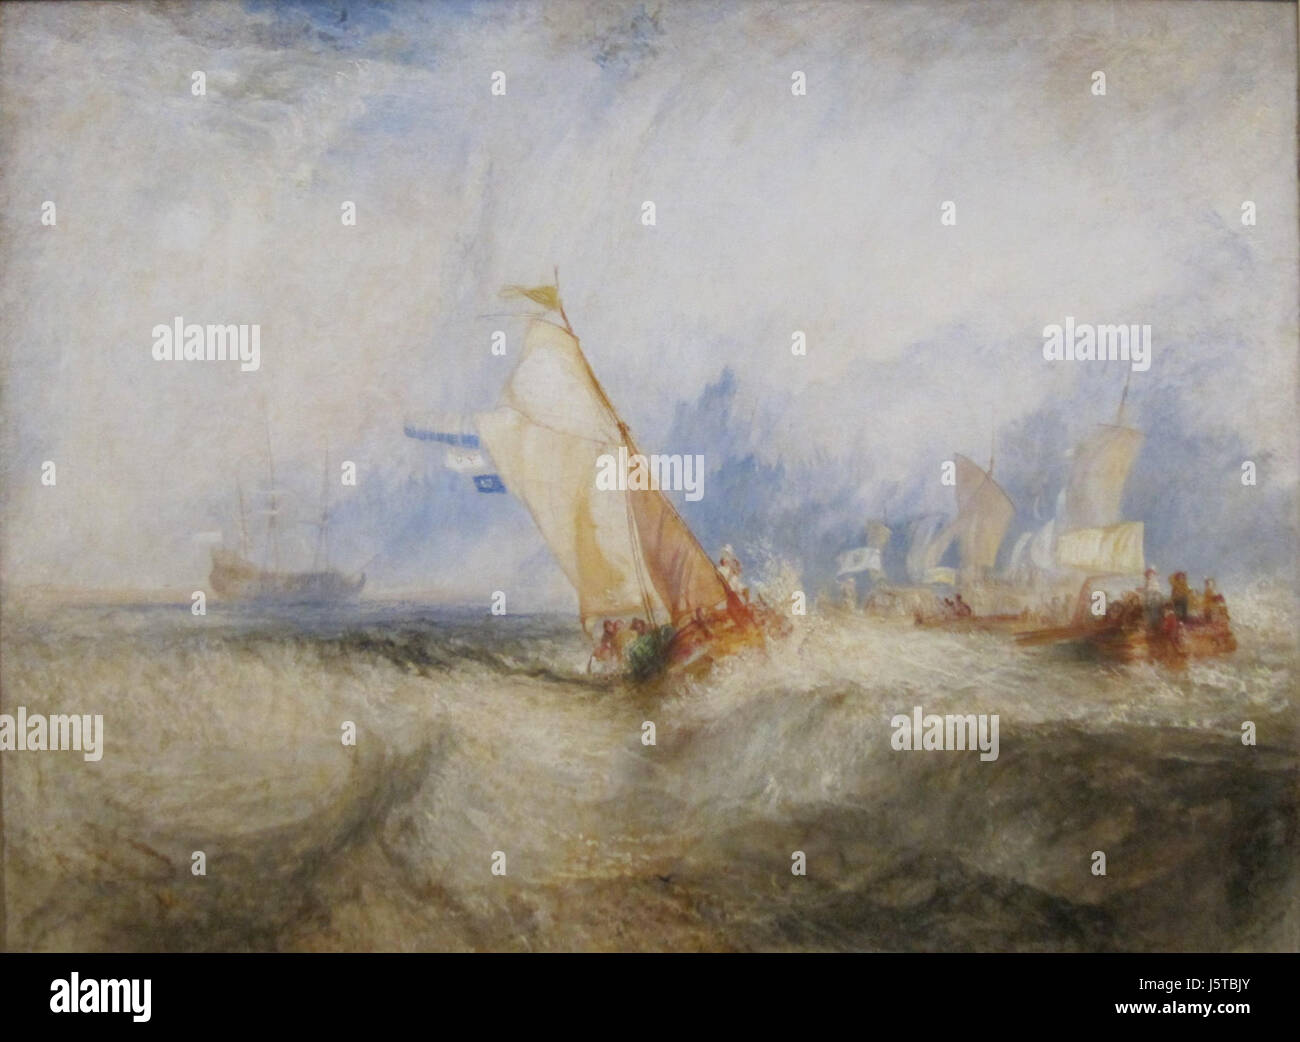 'Van Tromp, Going About to Please his Masters, Ships a Sea, Getting a Good Wind' by Turner Stock Photo